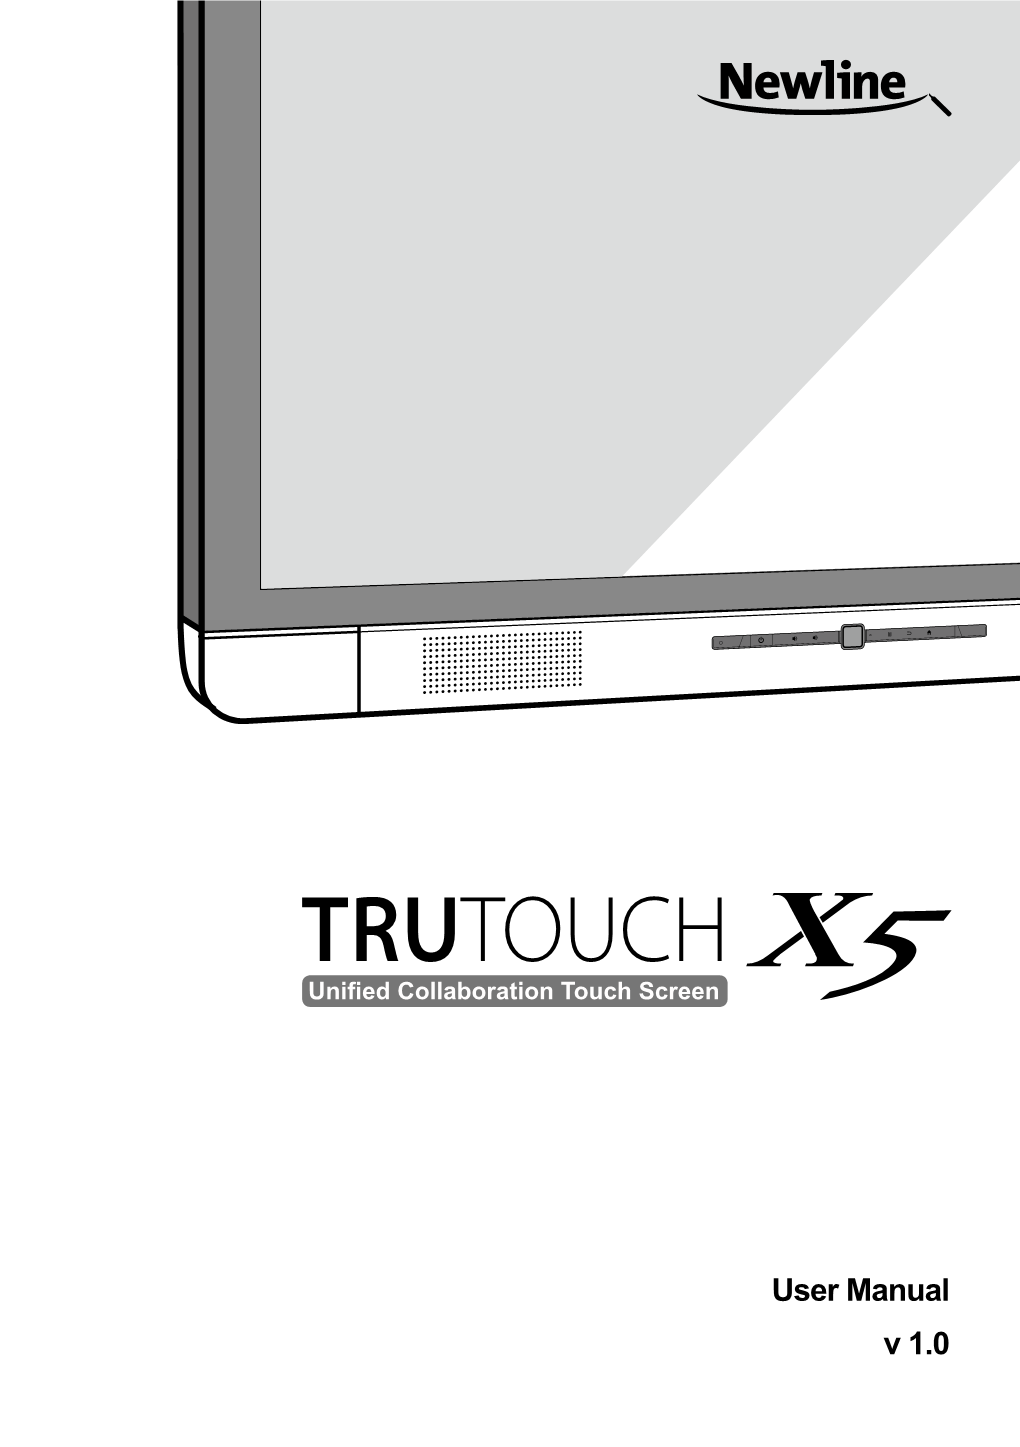 User Manual V 1.0 Welcome to the World of TRUTOUCH